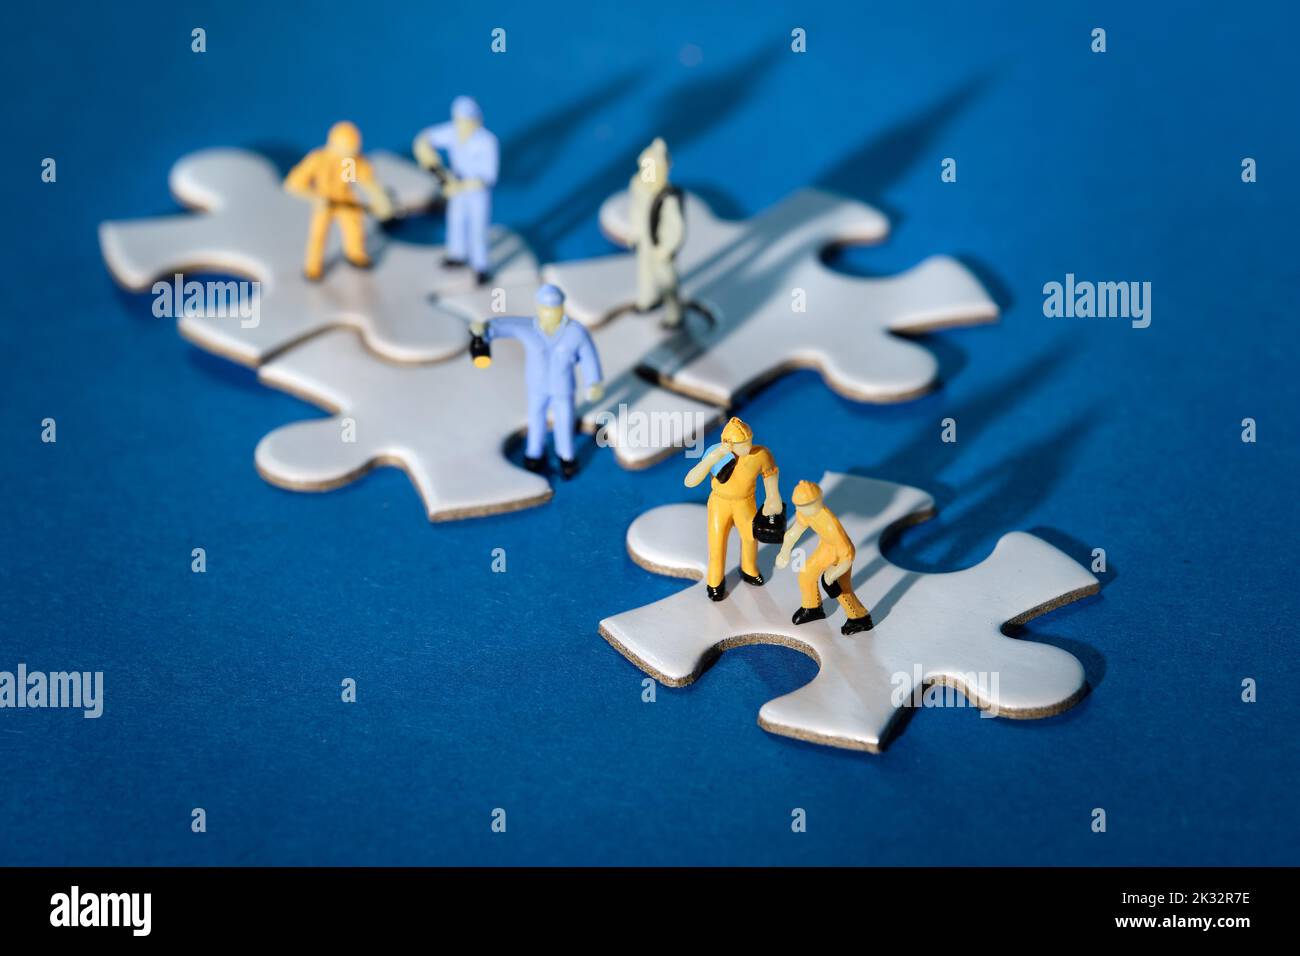 Team of tiny worker miniature figures on linked jigsaw puzzle pieces island on blue paper. Dramatic light with long shadows. Stock Photo